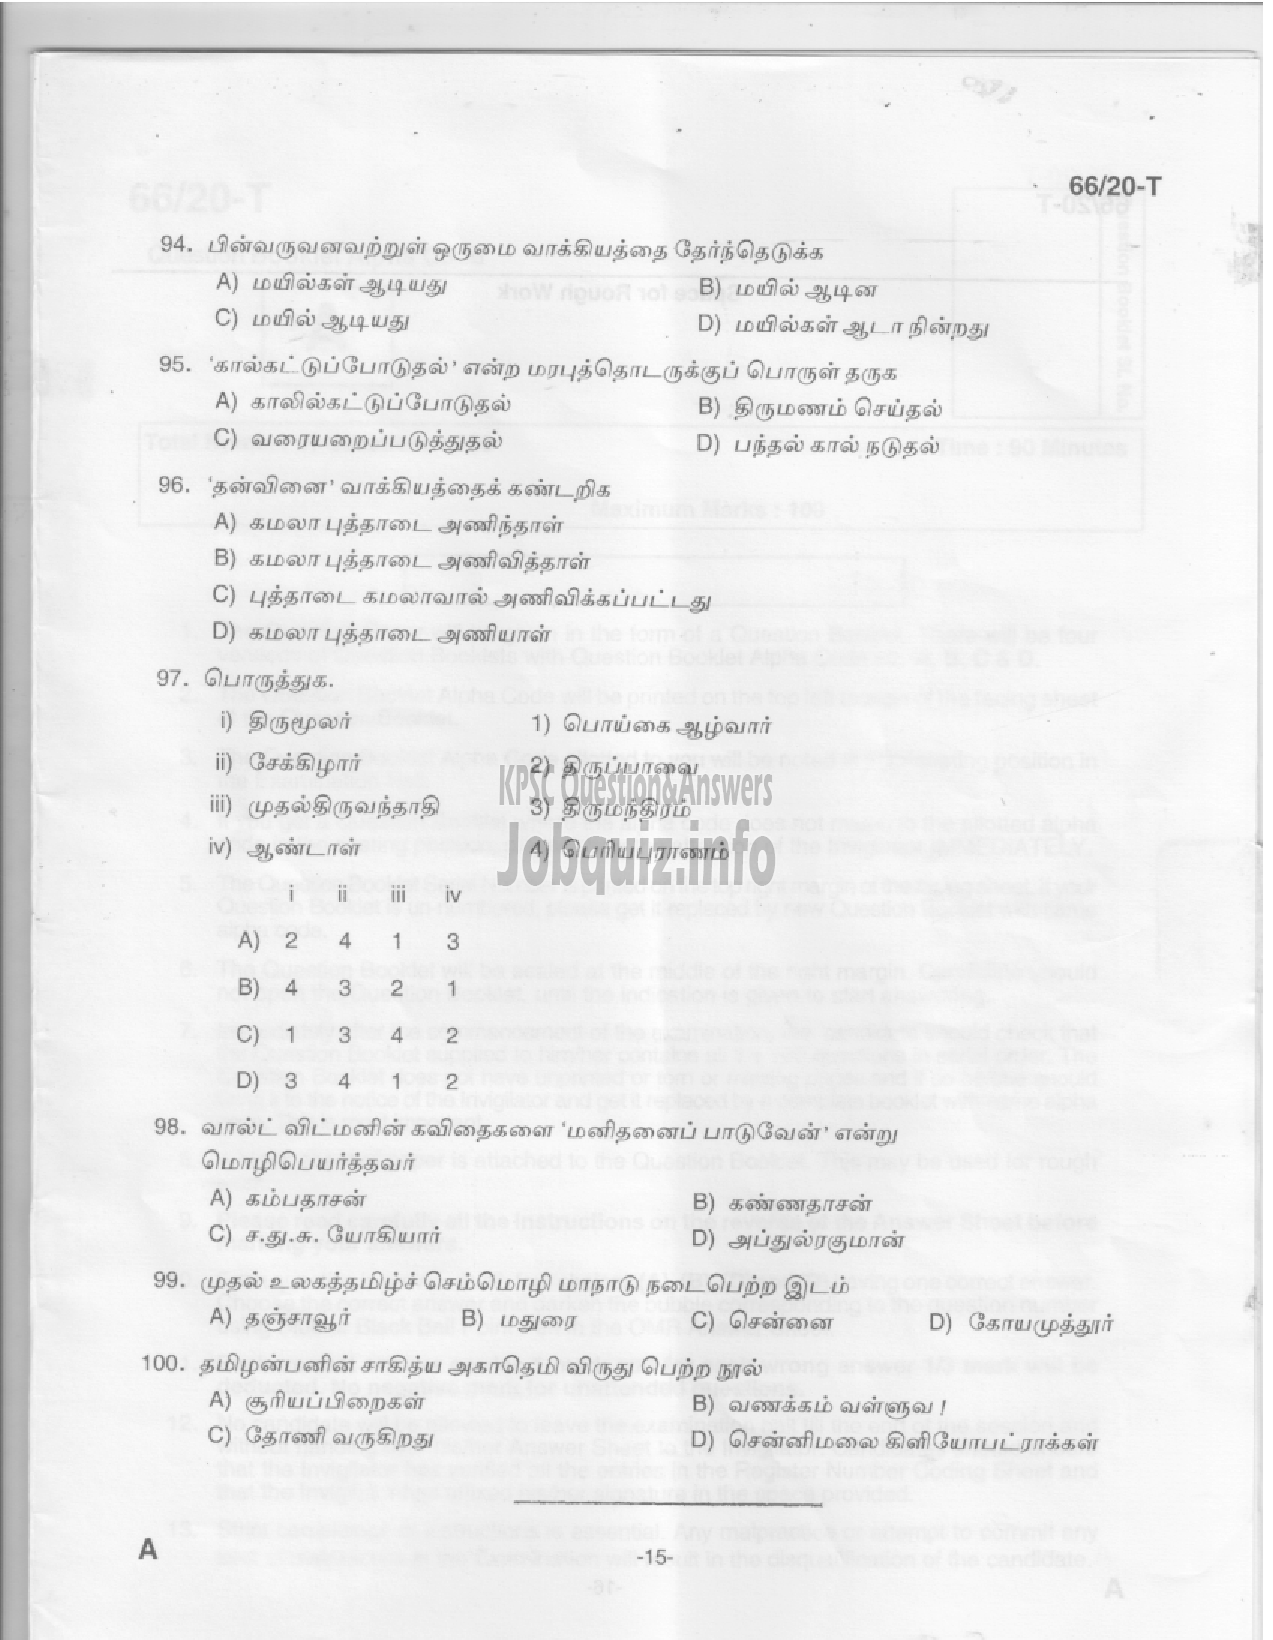 Kerala PSC Question Paper -  KAS Officer in Kerala Administrative Service (Supplimentary exam for Gazetted teaching staff in Education Department) (PAPER II) -15